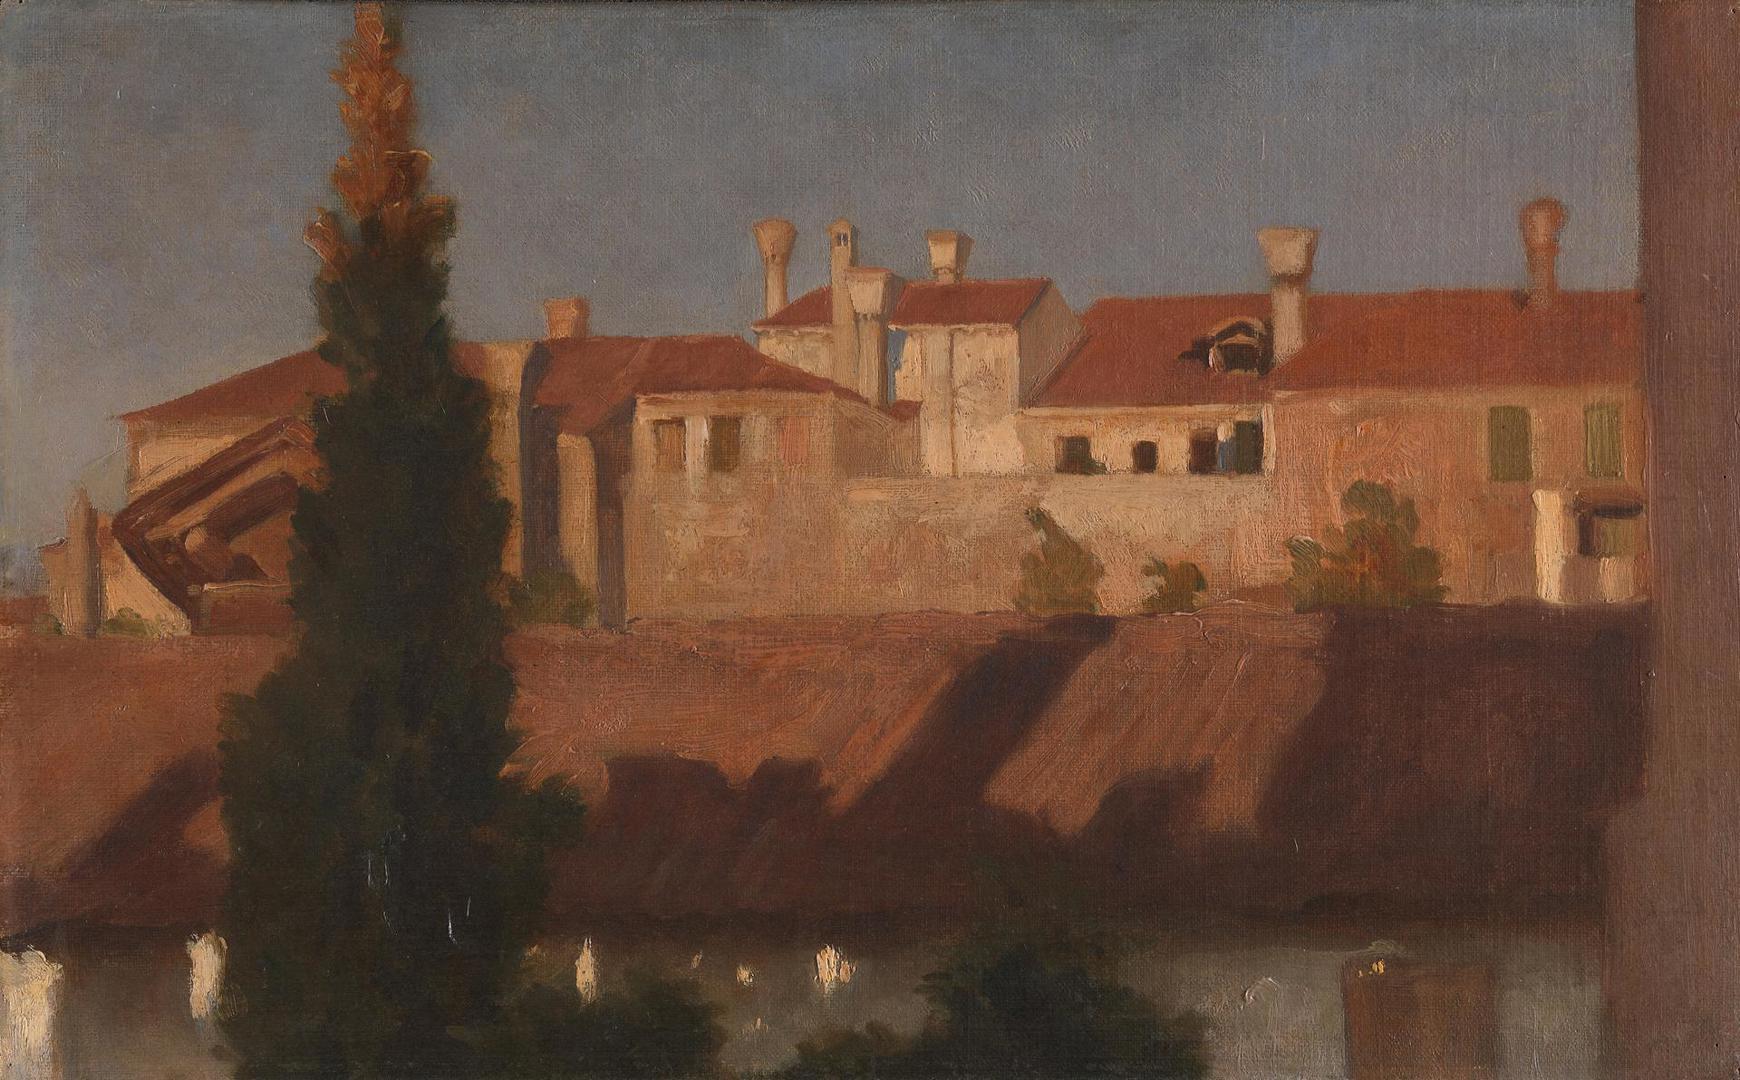 Houses in Venice by Frederic, Lord Leighton